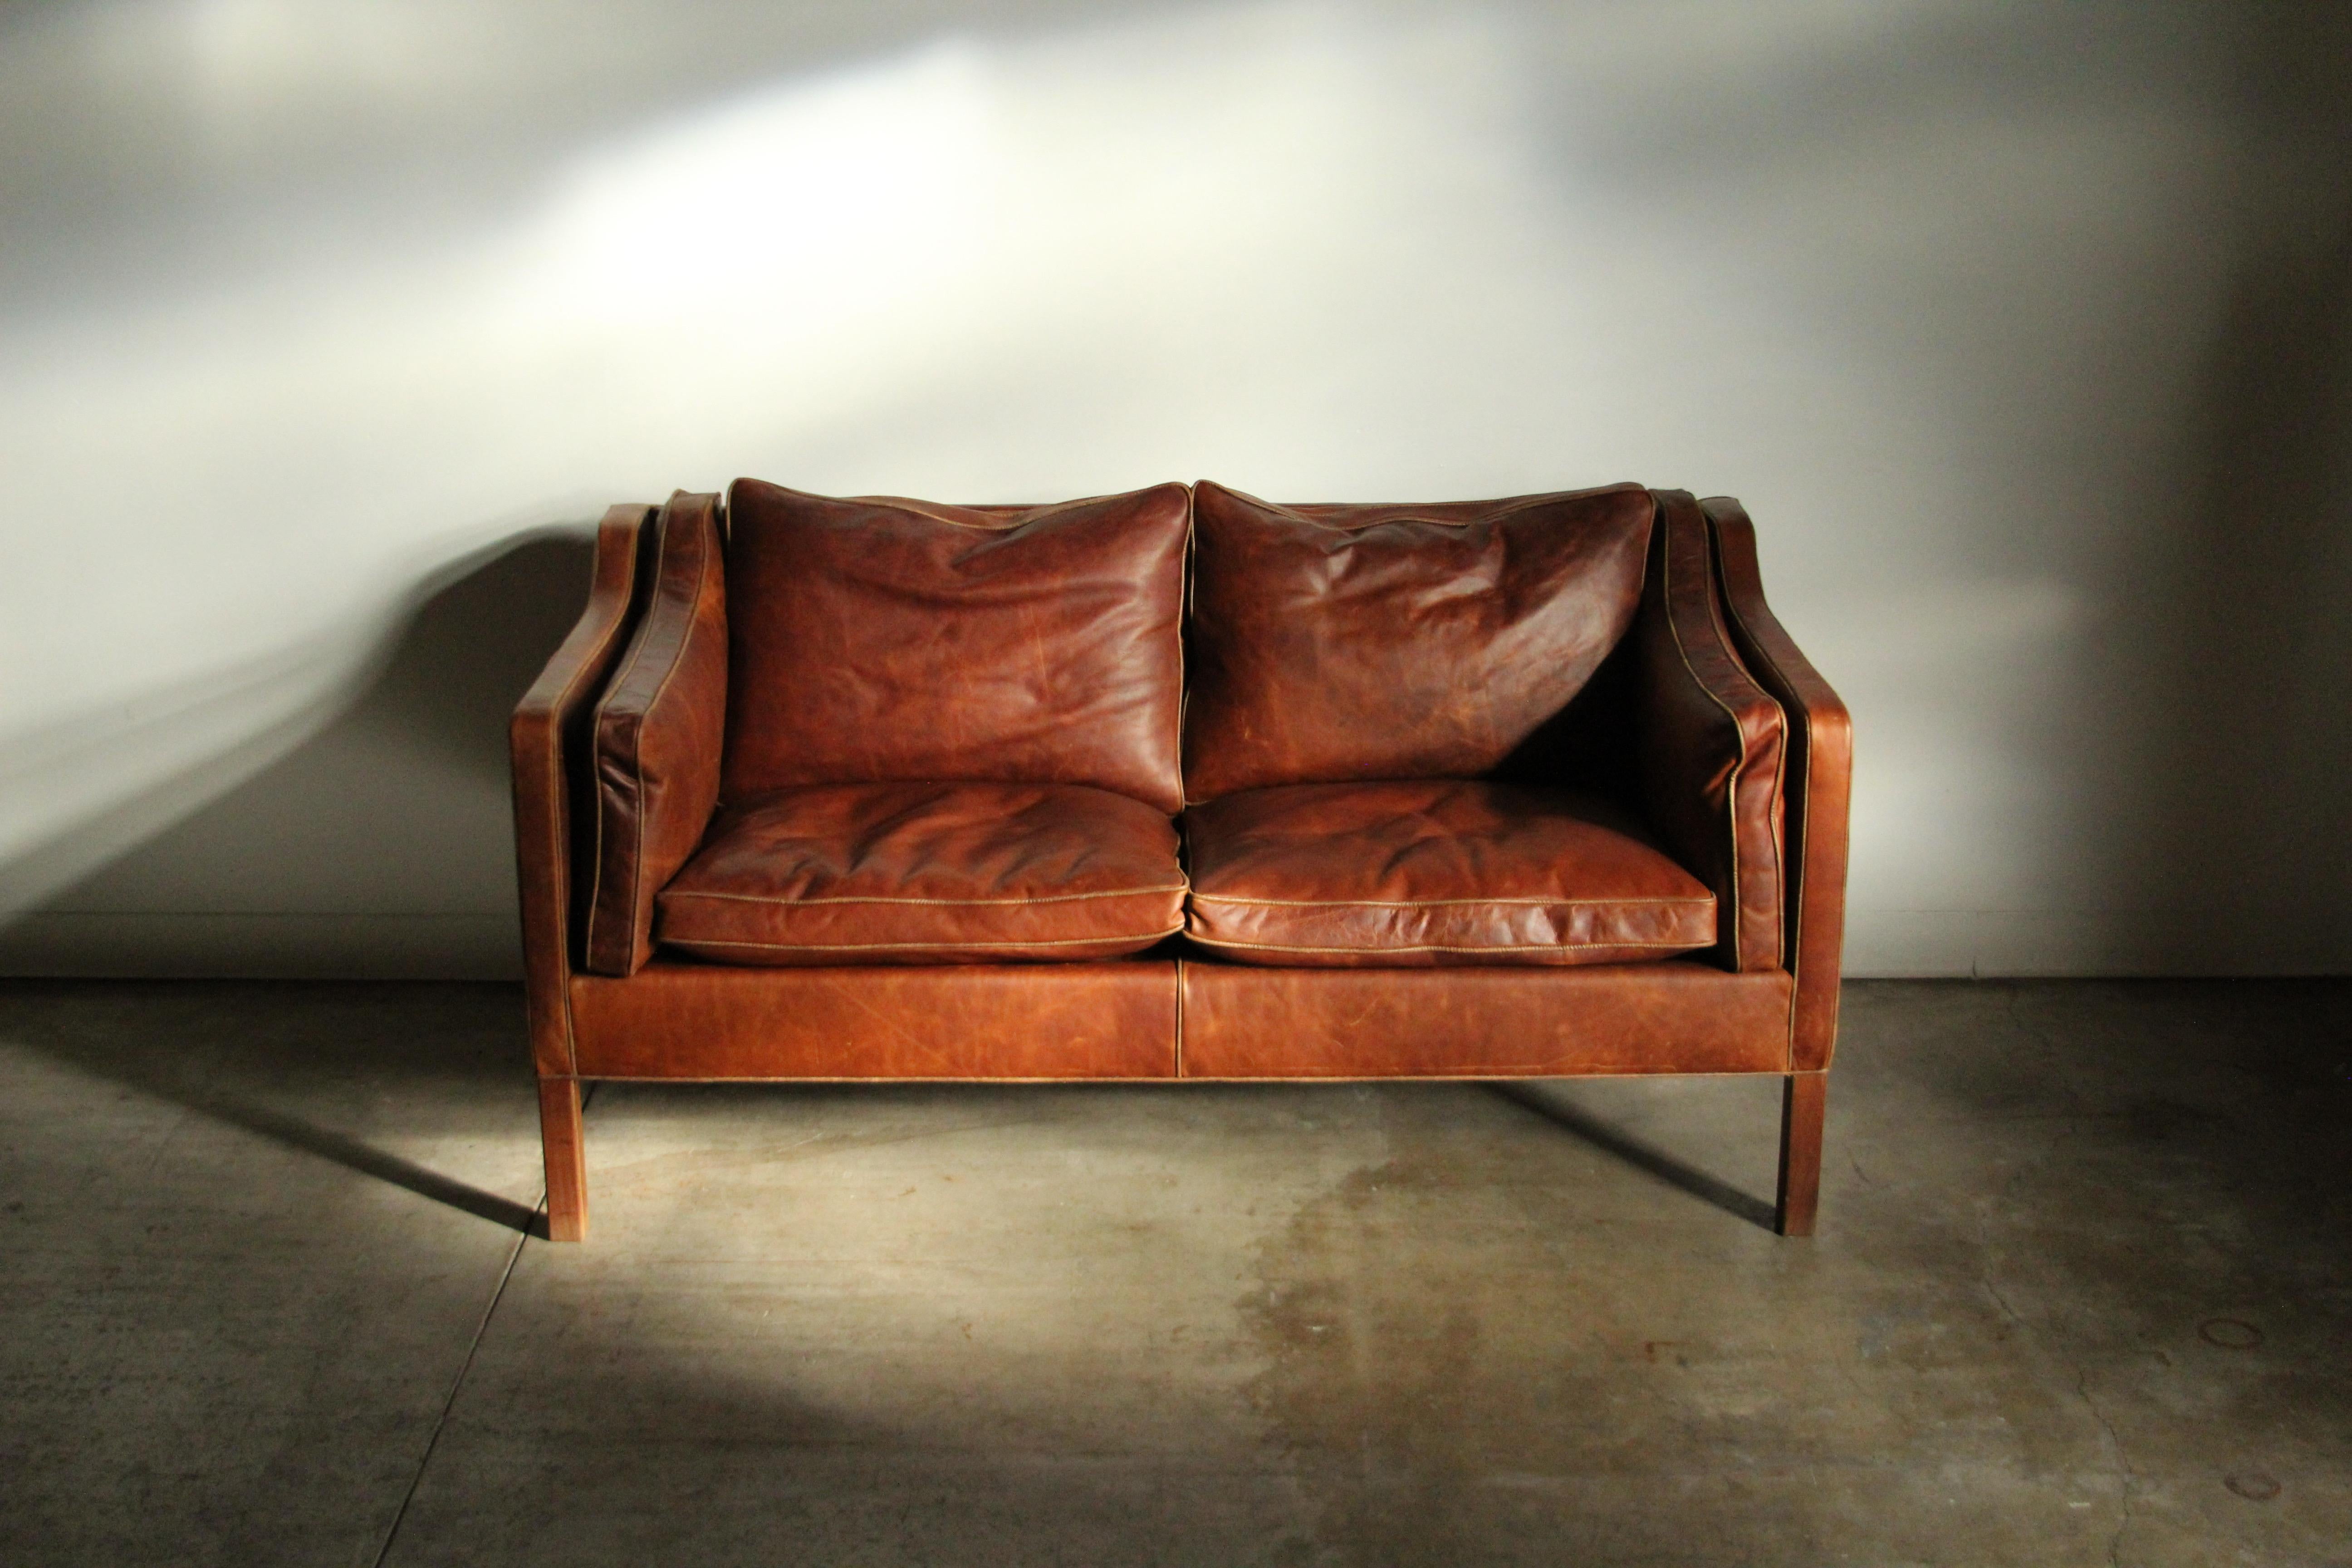 A fabulous leather sofa loveseat designed by the Danish master Borge Mogensen and manufactured by Frederica in the 1950s. This solid little sofa has been freshly reupholstered in thick, top grain, naturally distressed leather. It is so so soft and